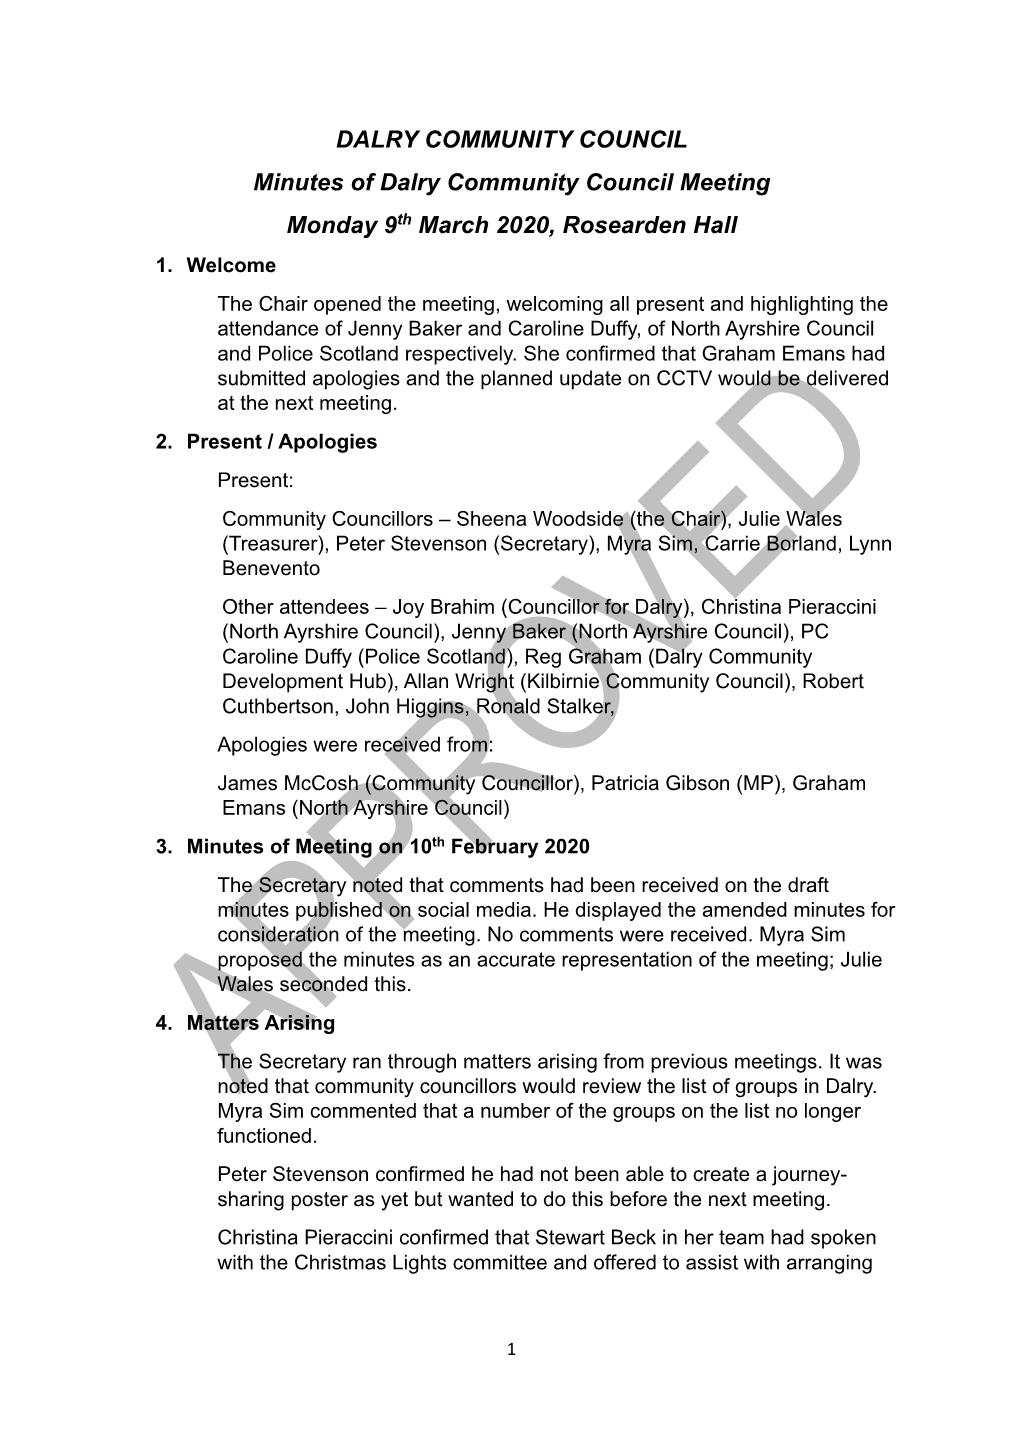 DALRY COMMUNITY COUNCIL Minutes of Dalry Community Council Meeting